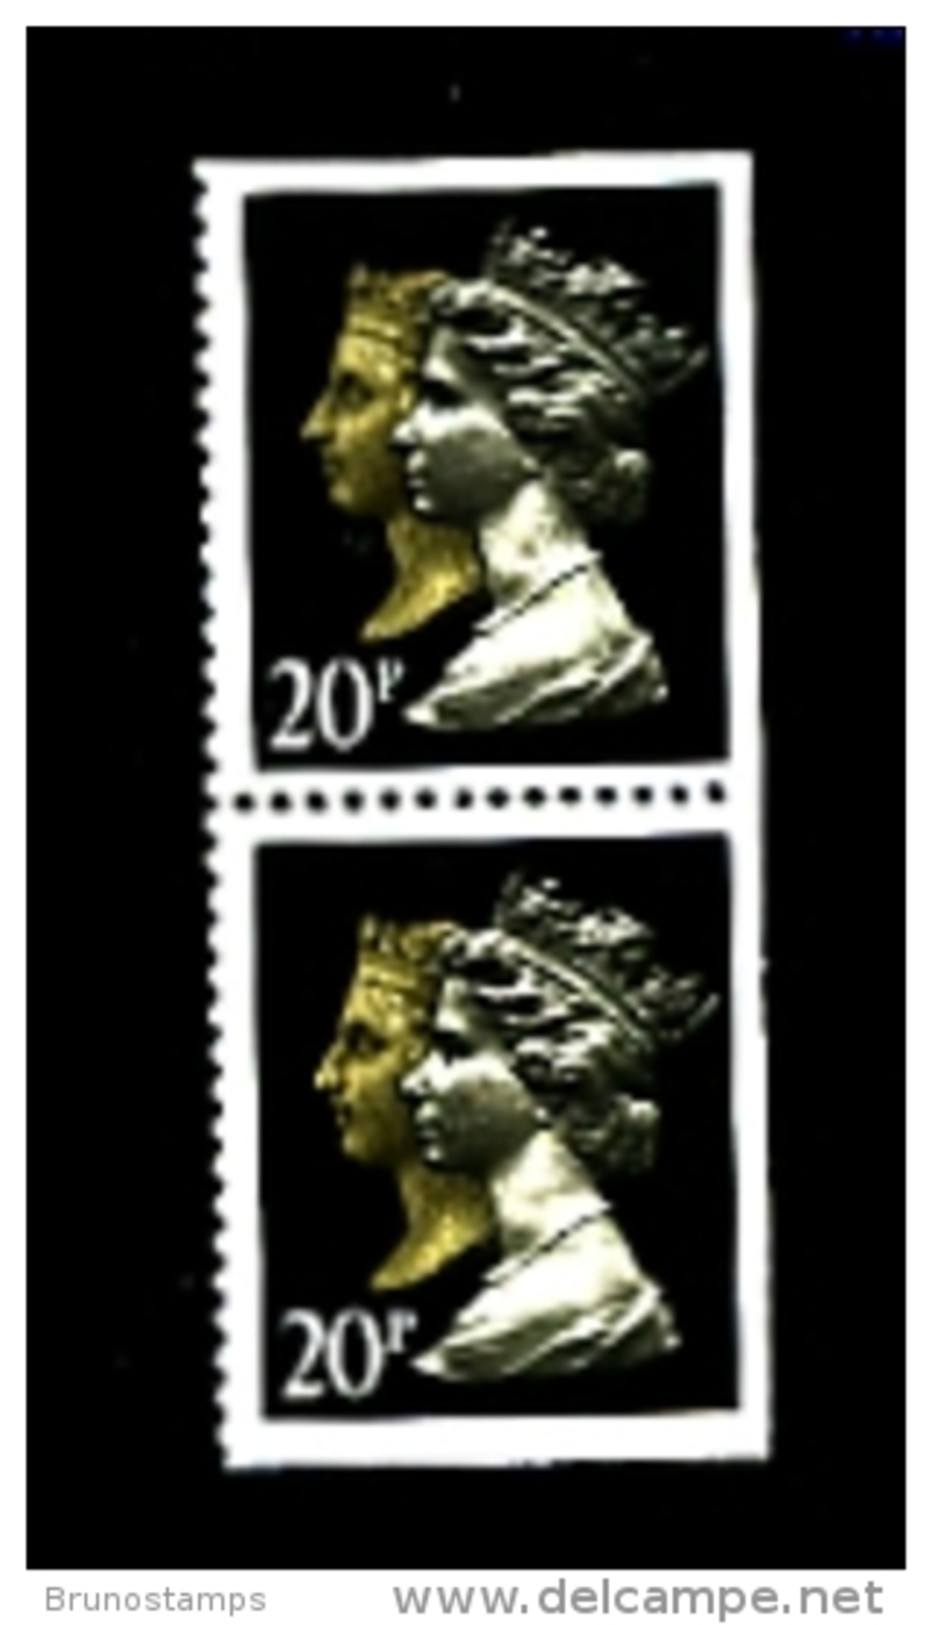 GREAT BRITAIN - 1990  DOUBLE HEADS  20p. PCP HARRISON  PAIR IMPERF. 3 SIDES MINT NH  SG 1469 - Machins